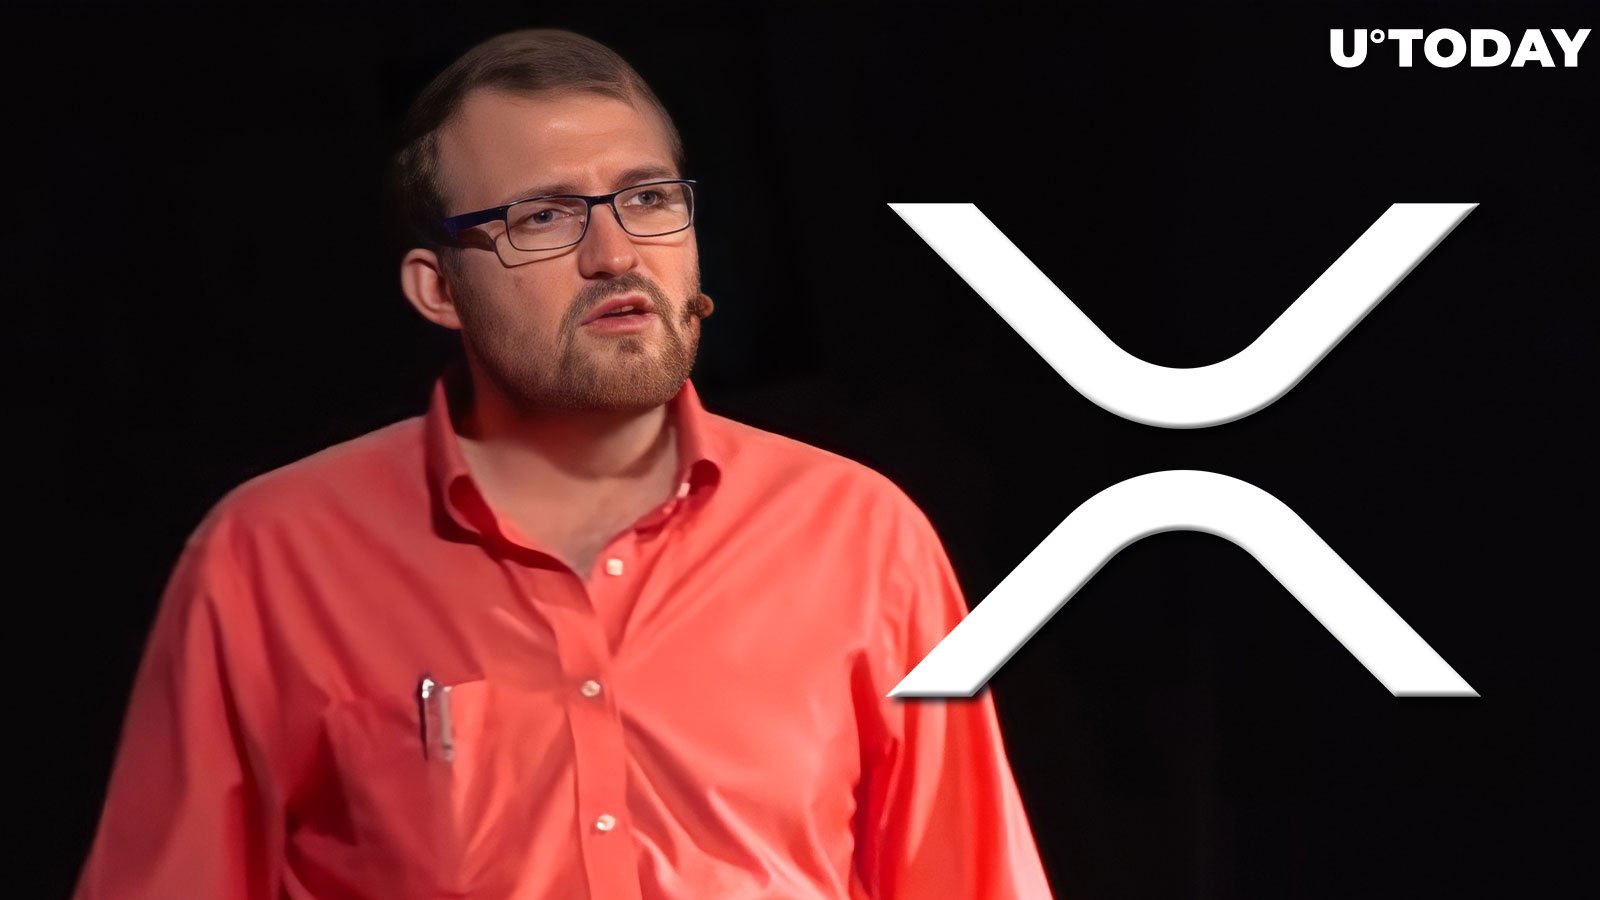 Cardano Founder Says XRP Should Be Regulated as Commodity, Here’s Why